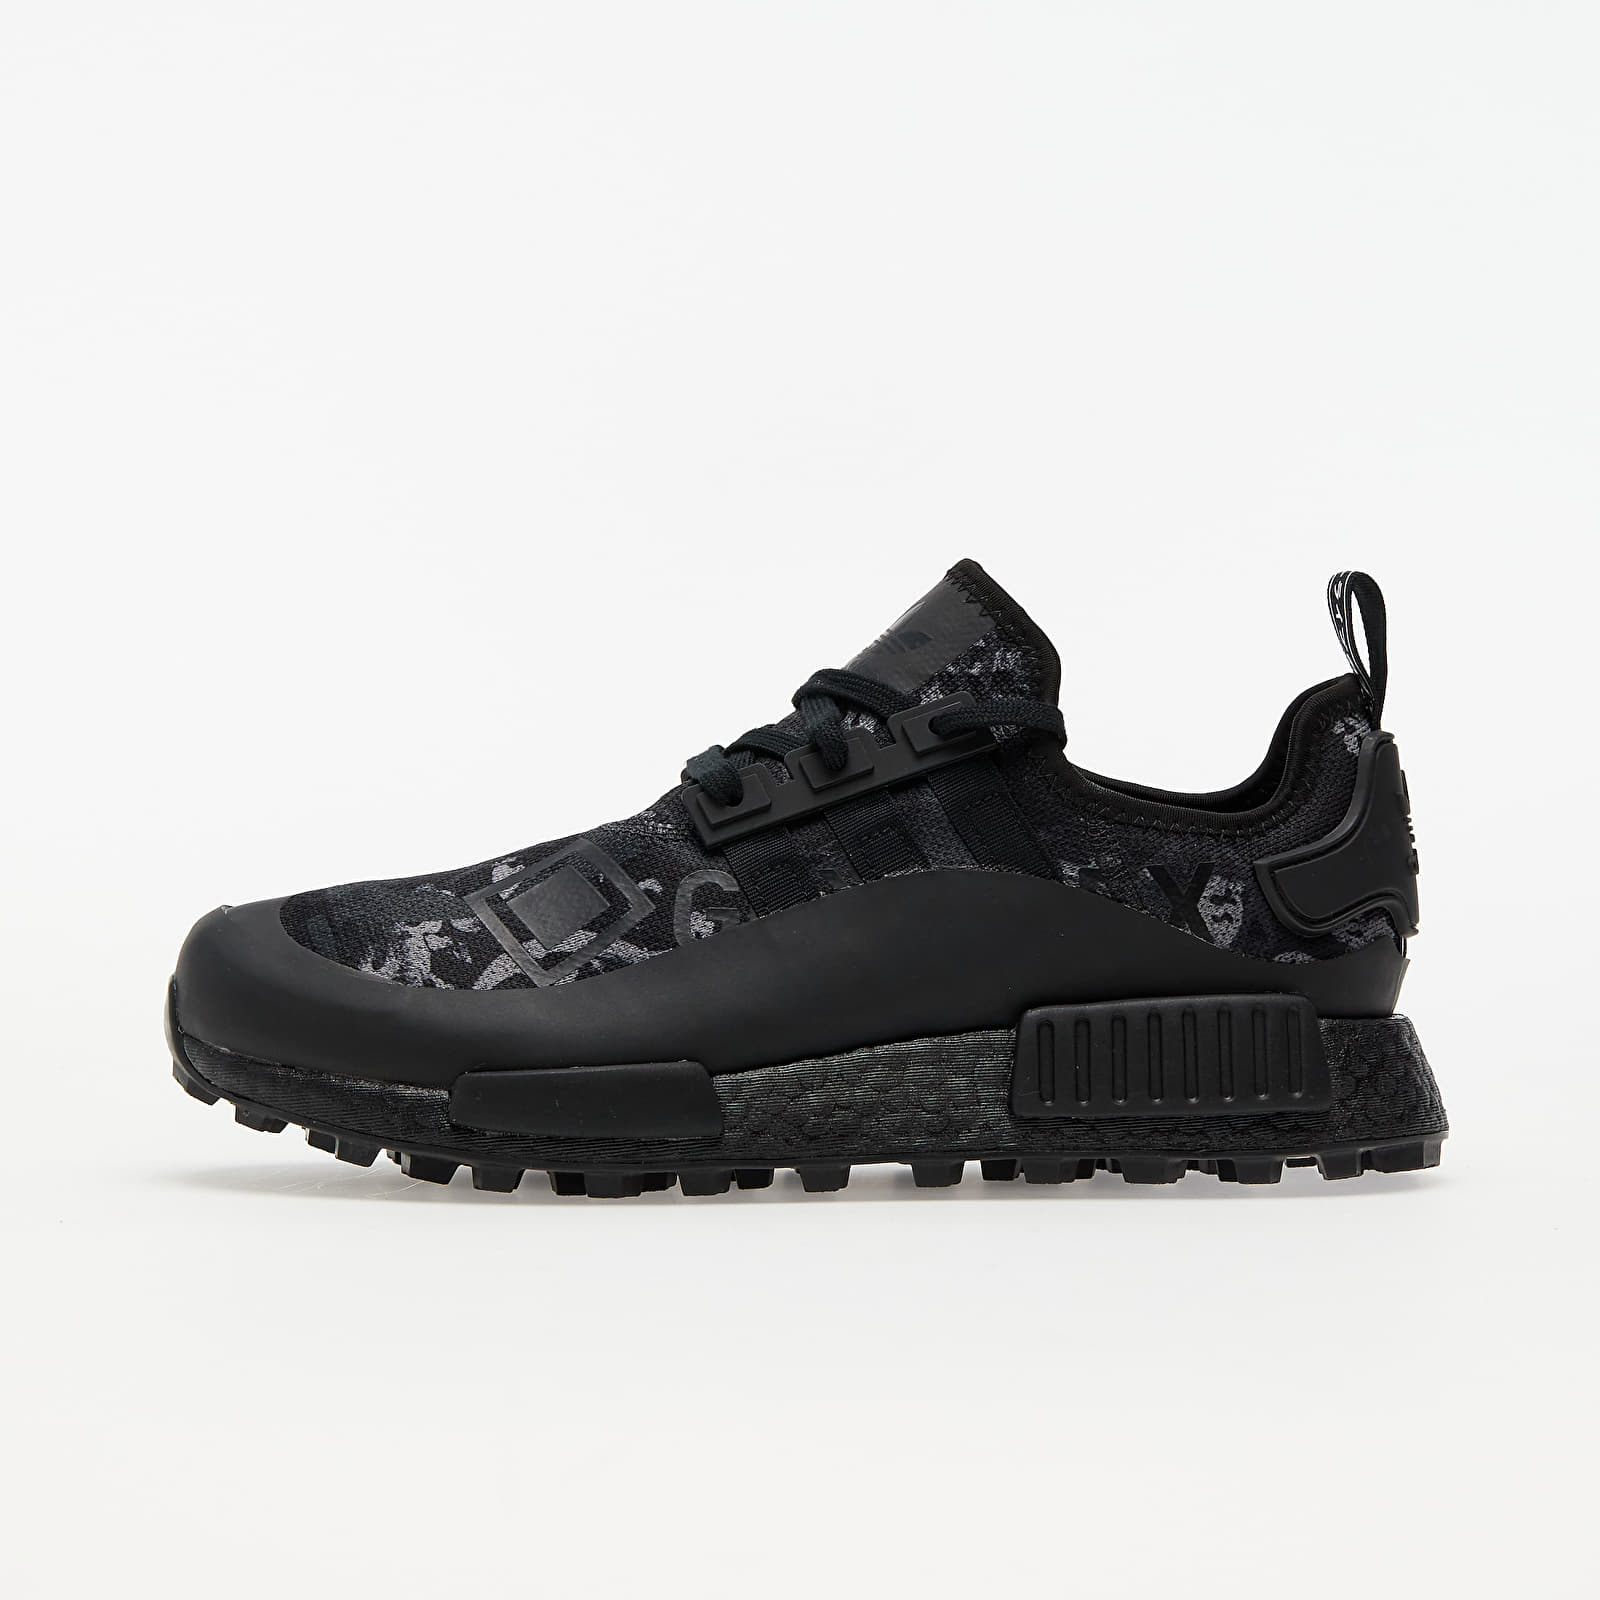 Men's shoes adidas NMD_R1 TR Gore-Tex Core Black/ Core Black/ Core Black